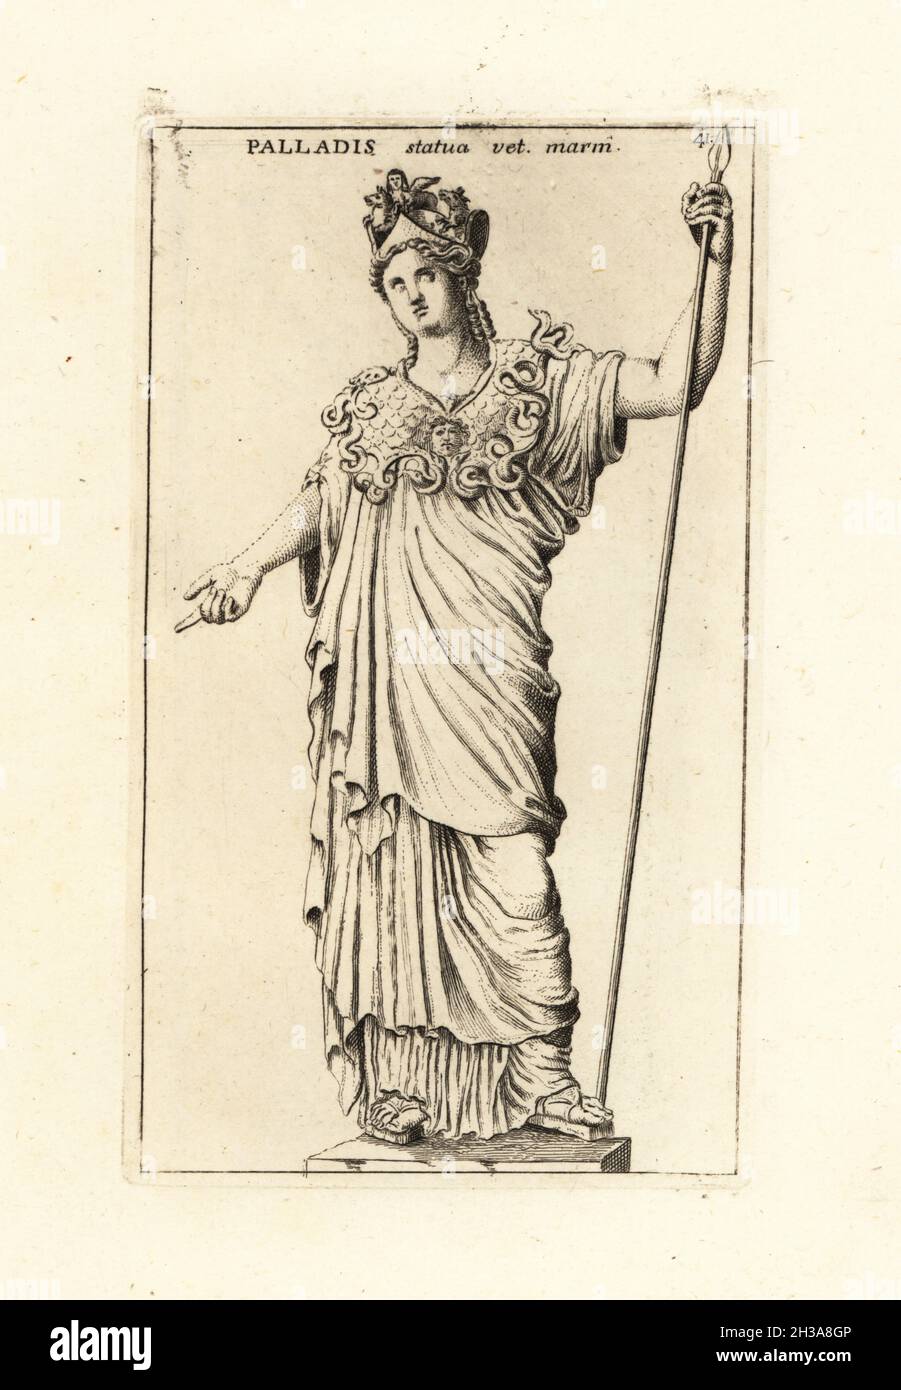 Statue of Roman goddess Athena Pallas, with crown, ornate breastplate with serpents and and spear. Athena farnese, later Roman copy of a Greek original by Pyrrhos from Phidias' circle, Museo Archeologico, Naples Palladis statua vetus marmorea. Copperplate engraving by Giovanni Battista Cannetti from Copperplates of the most beautiful ancient statues of Rome, Calcografia di piu belle statue antiche a Roma, engraved by Cannetti all'Arco della Ciambella, published by Gaetano Quojani, Rome, 1779. Stock Photo